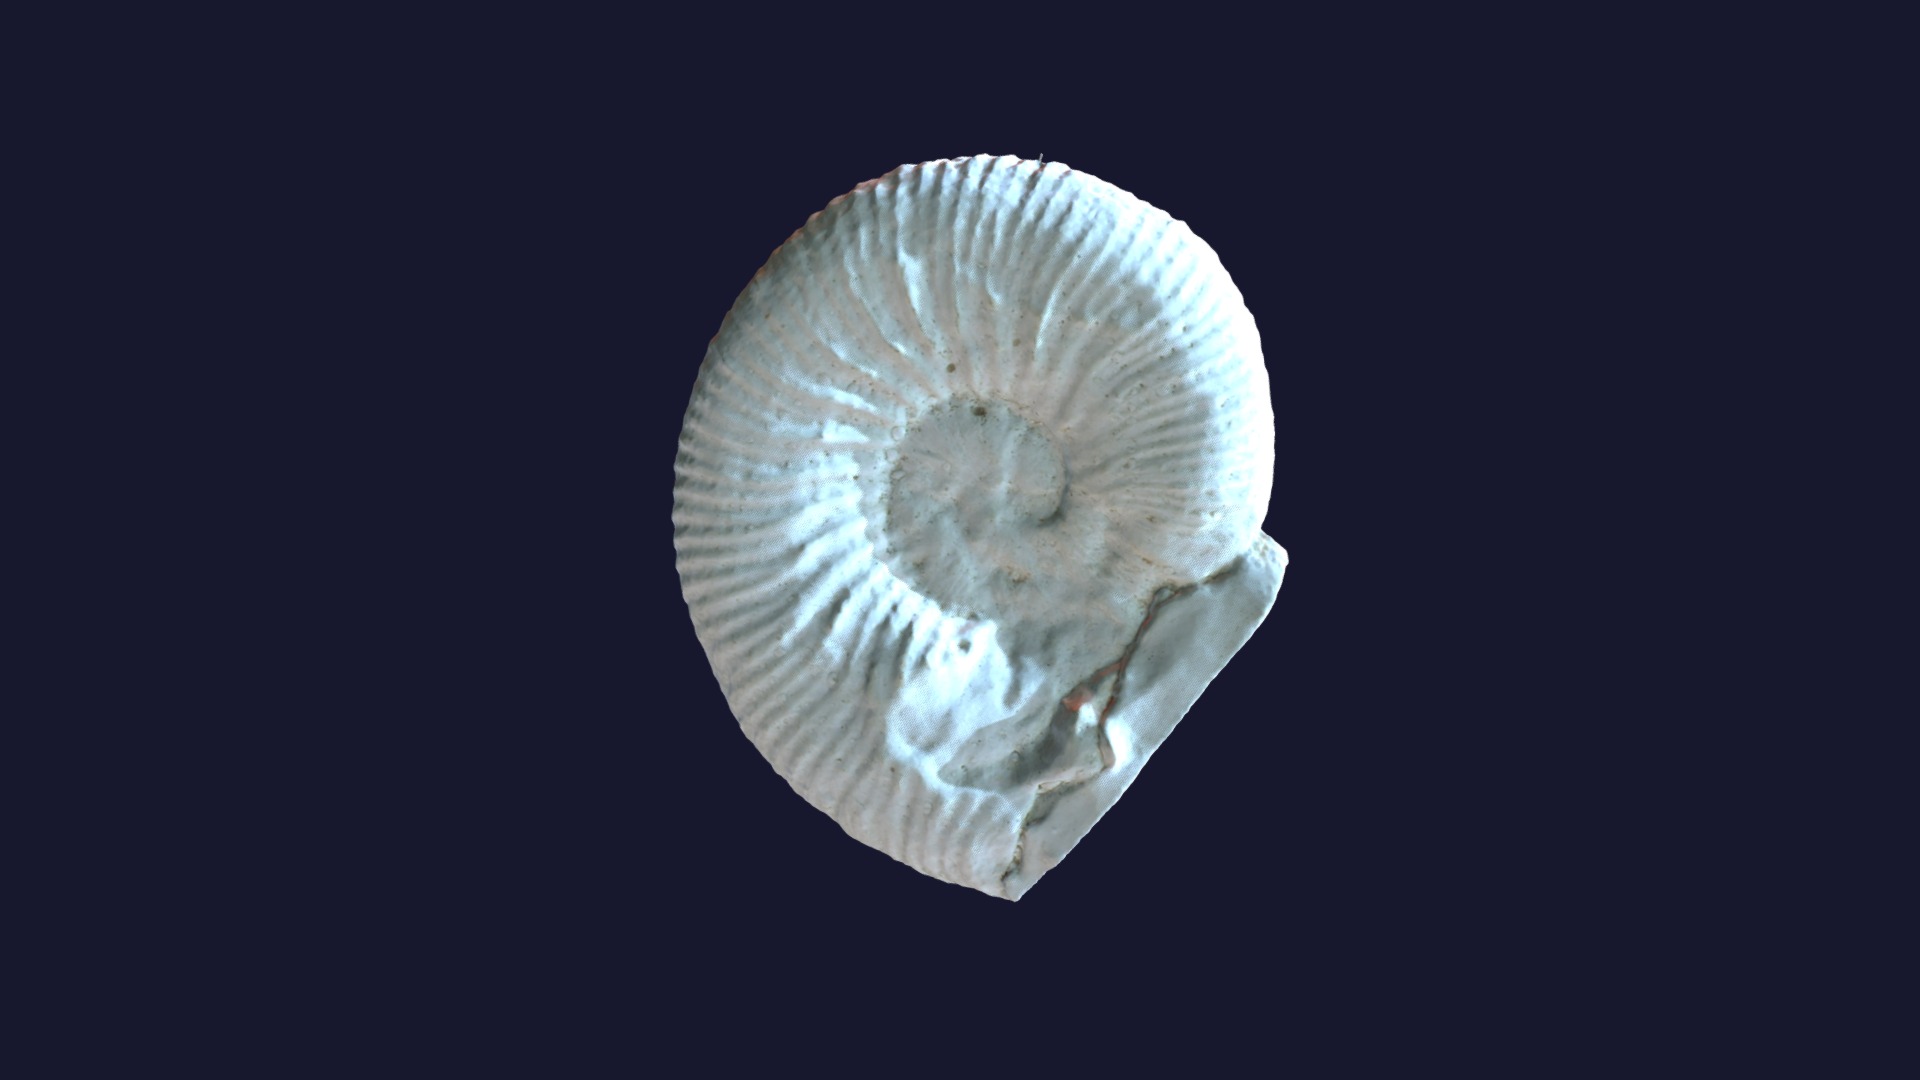 3D model Cosmoceras vigorosum 108303 - This is a 3D model of the Cosmoceras vigorosum 108303. The 3D model is about a close-up of a jellyfish.